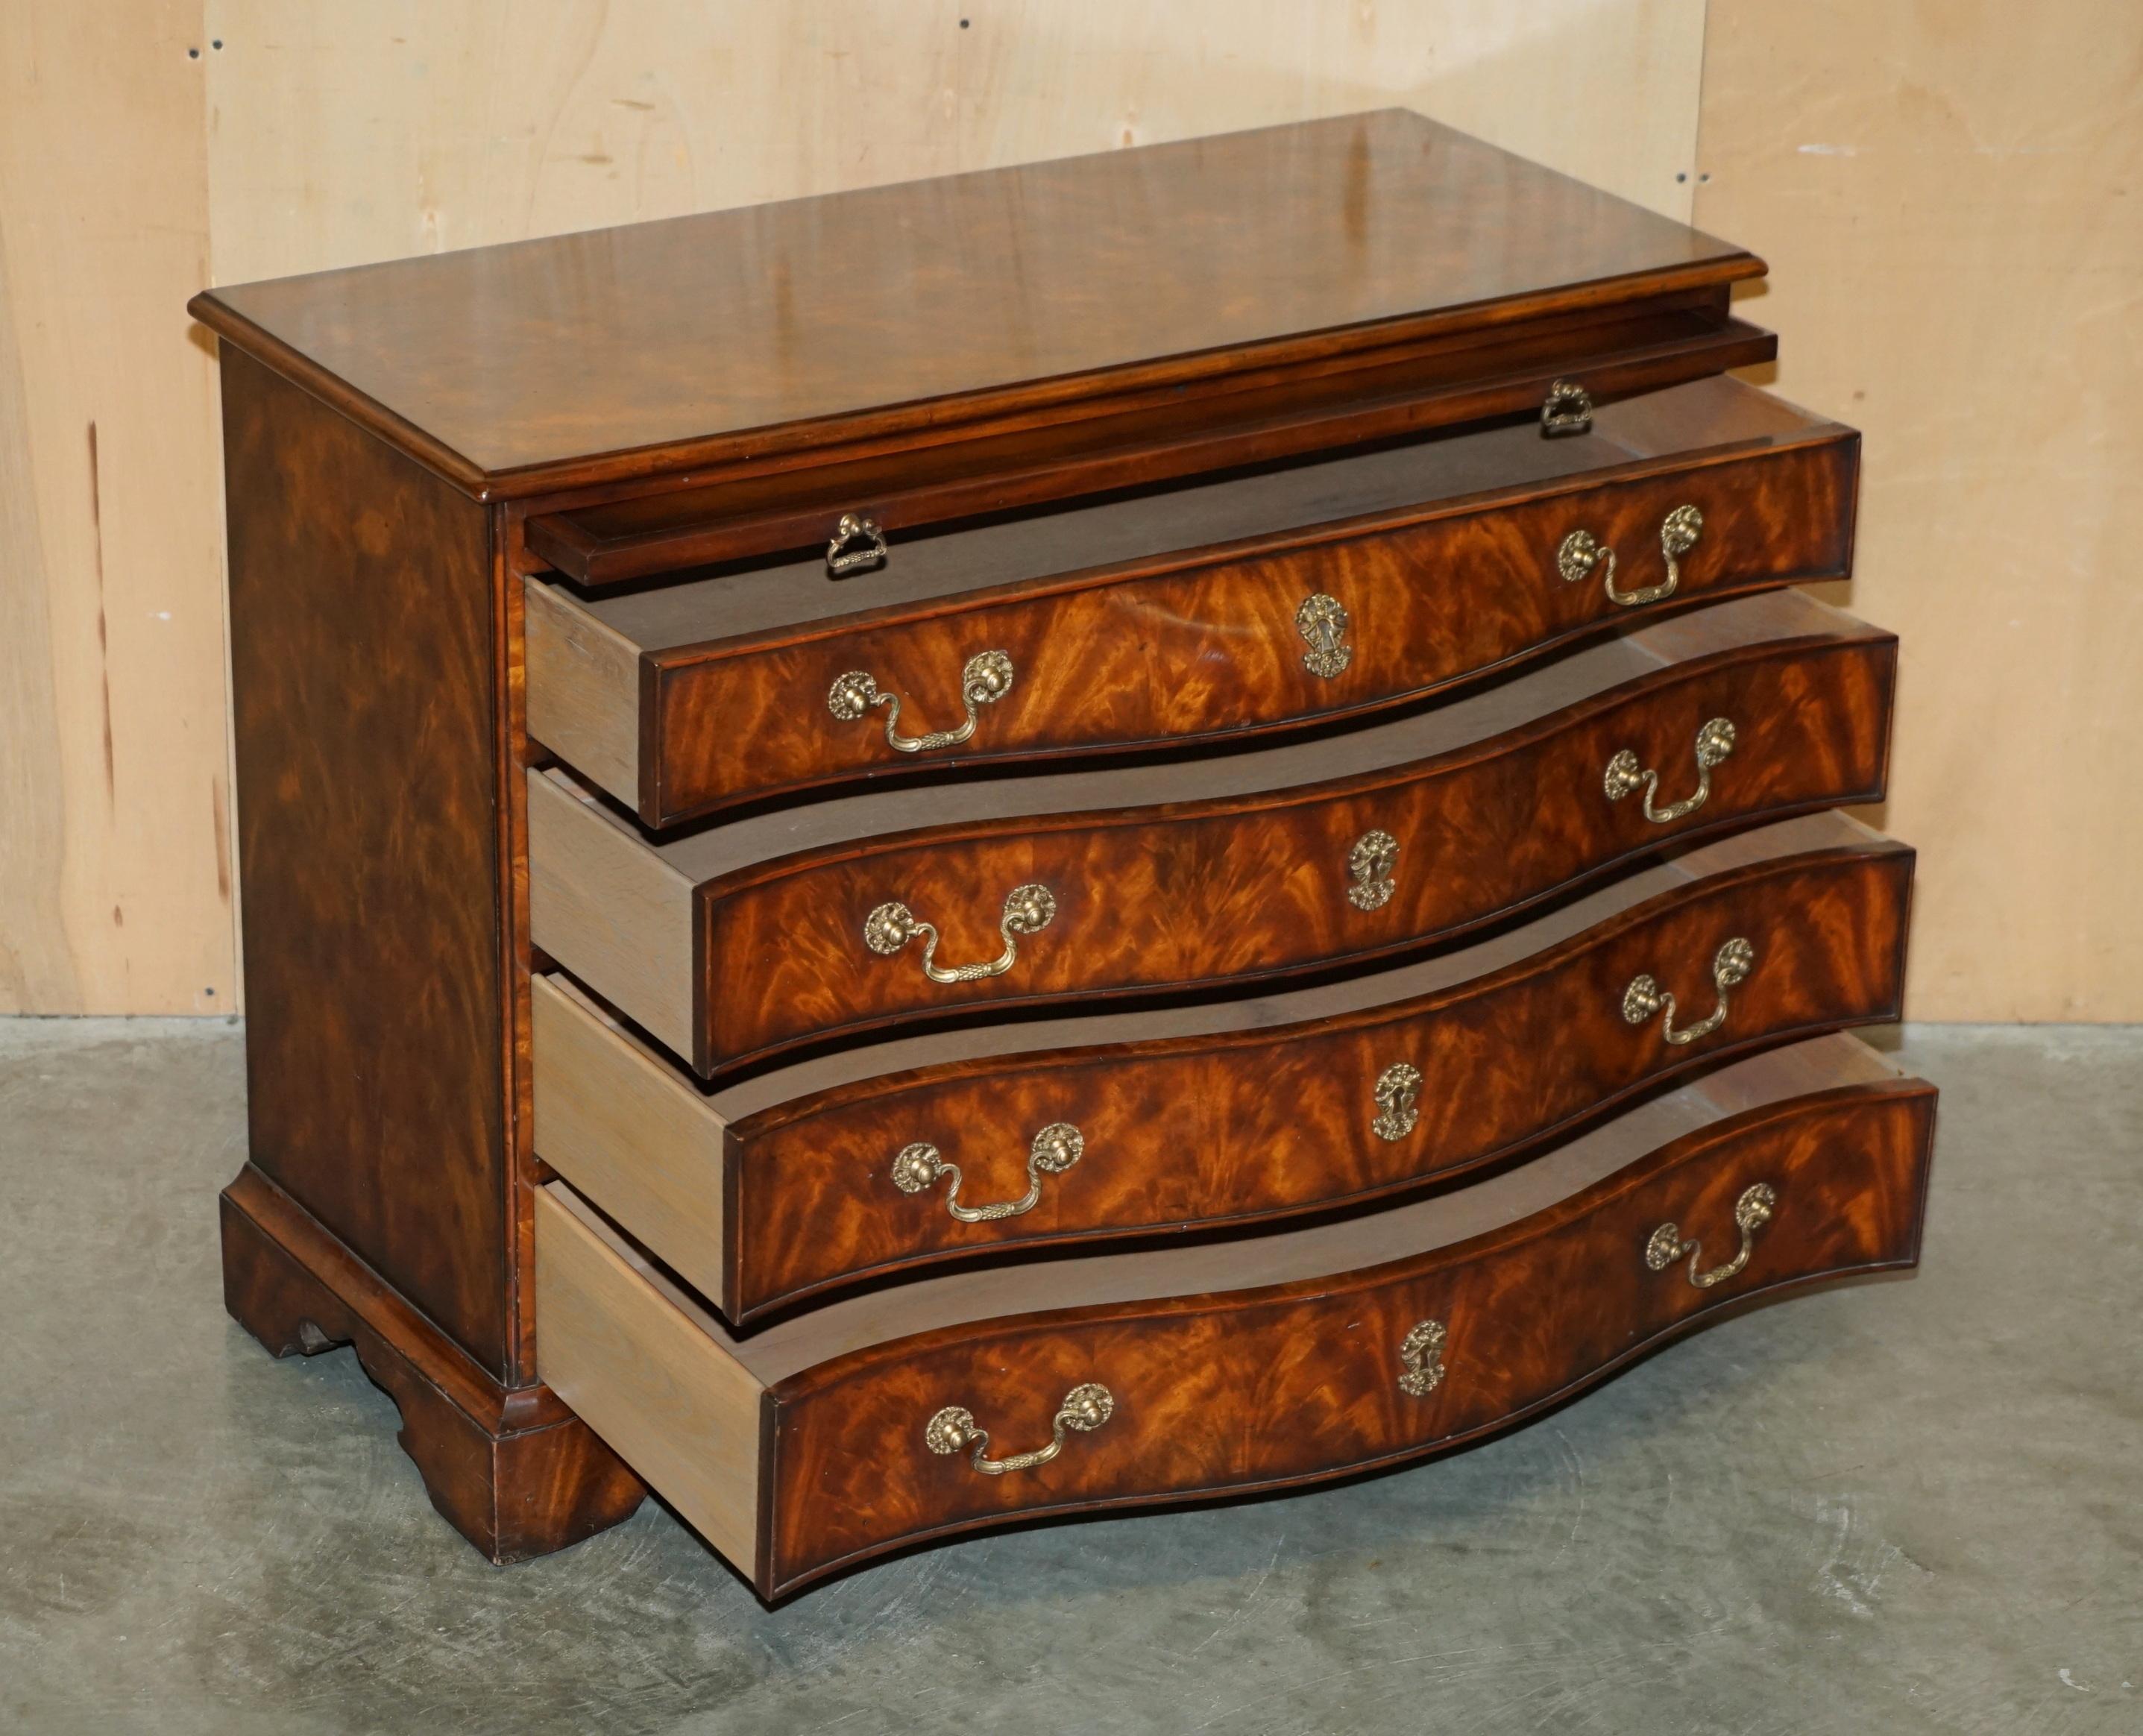 FINE PAIR OF ALTHORP SPENCER HOUSE FLAMED HARDWOOD SERPENTINE CHEST OF DRAWERs For Sale 9